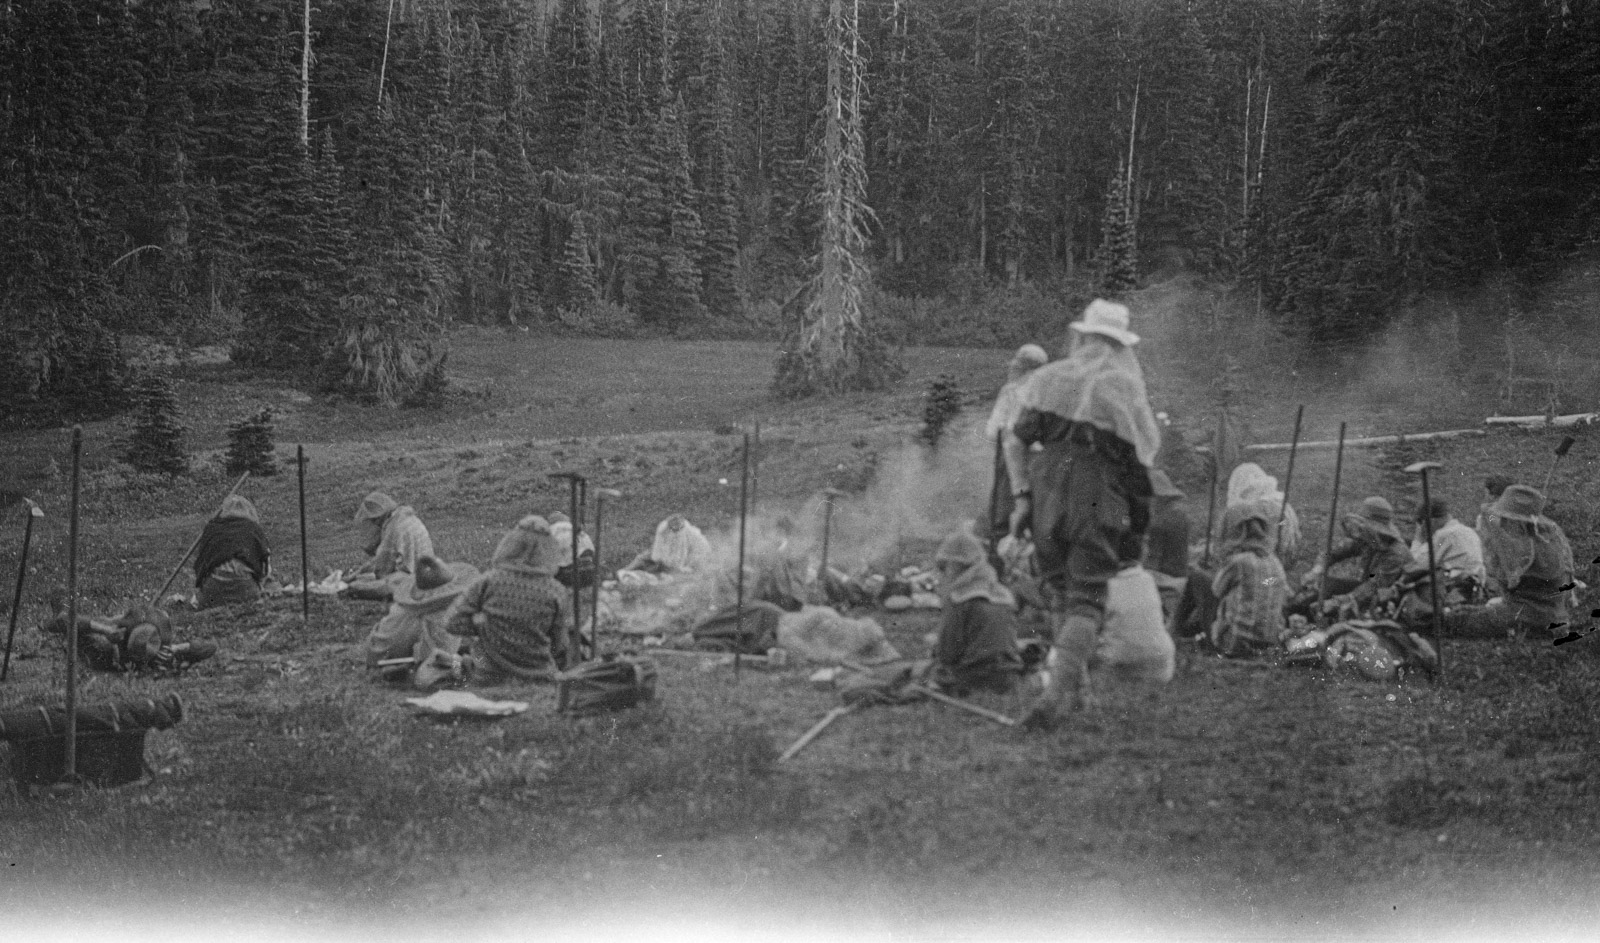 1927 - 1931 - Hiking group stopped in a field